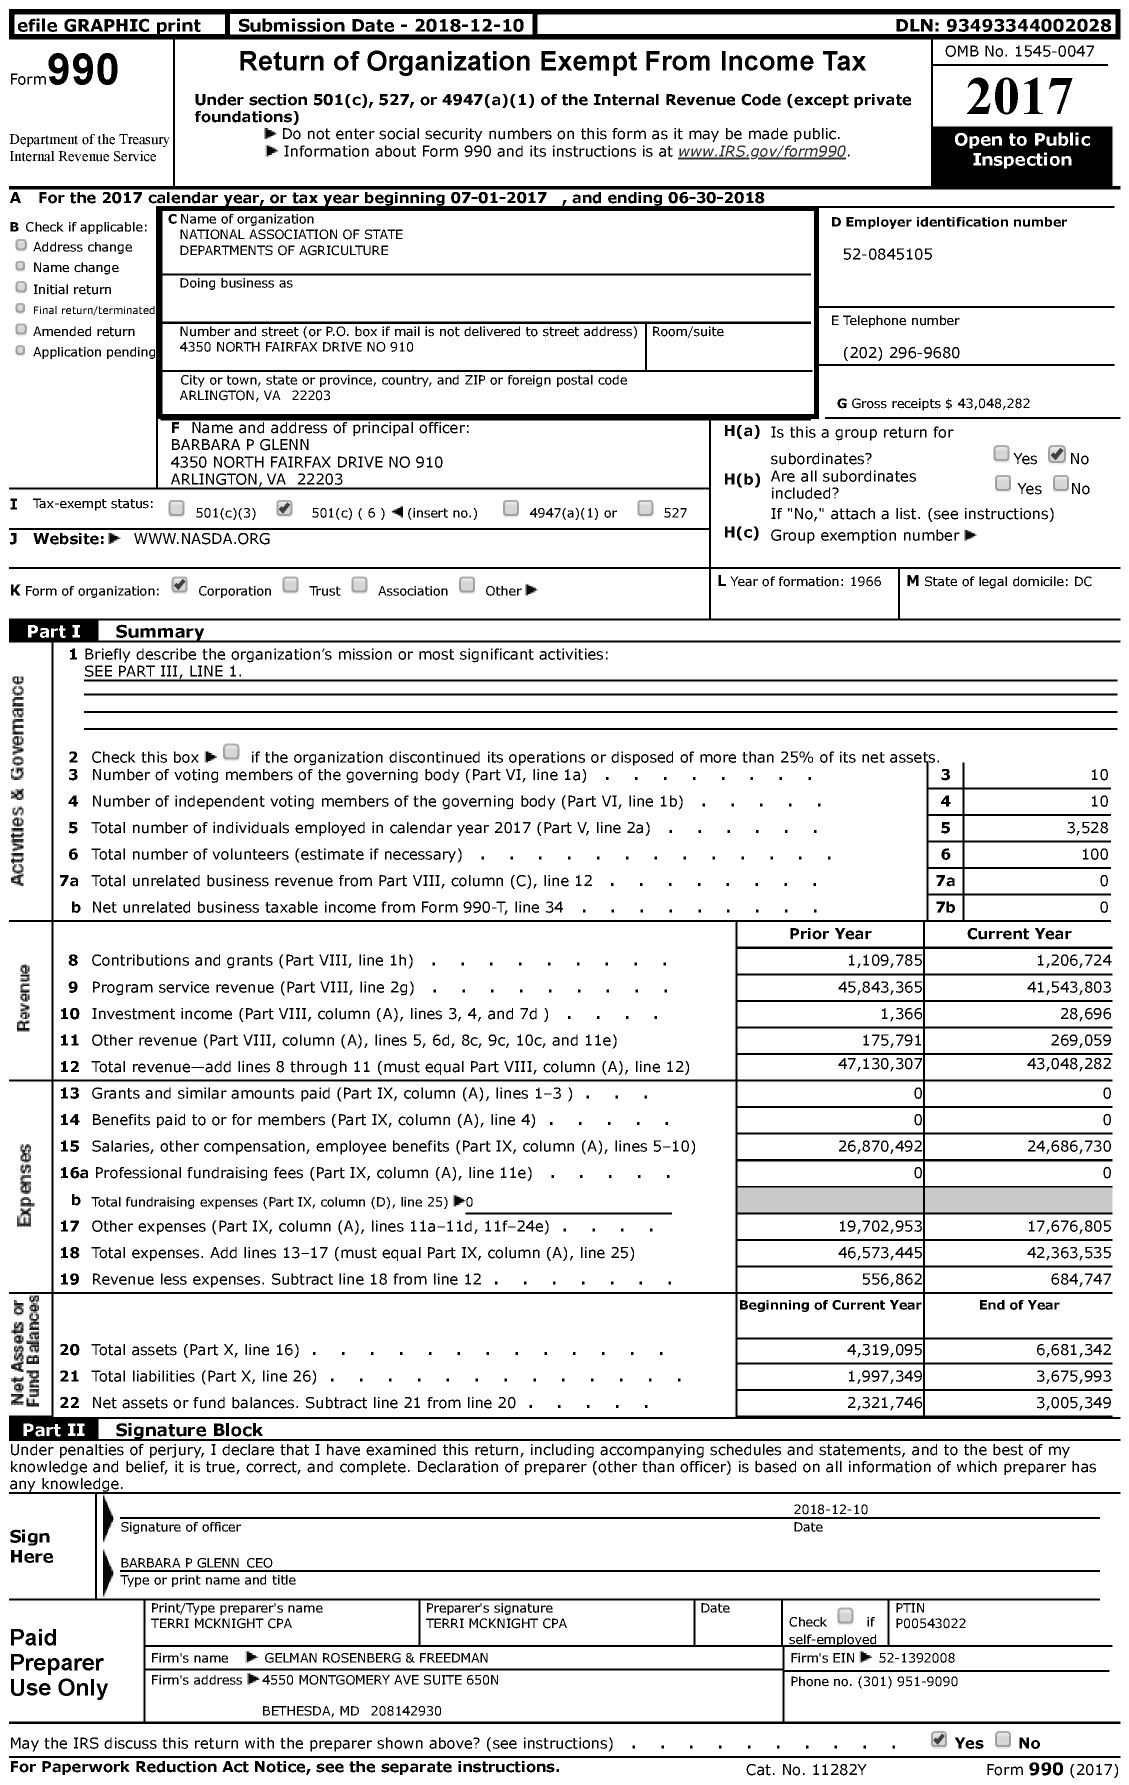 Image of first page of 2017 Form 990 for National Association of State Departments of Agriculture (NASDA)